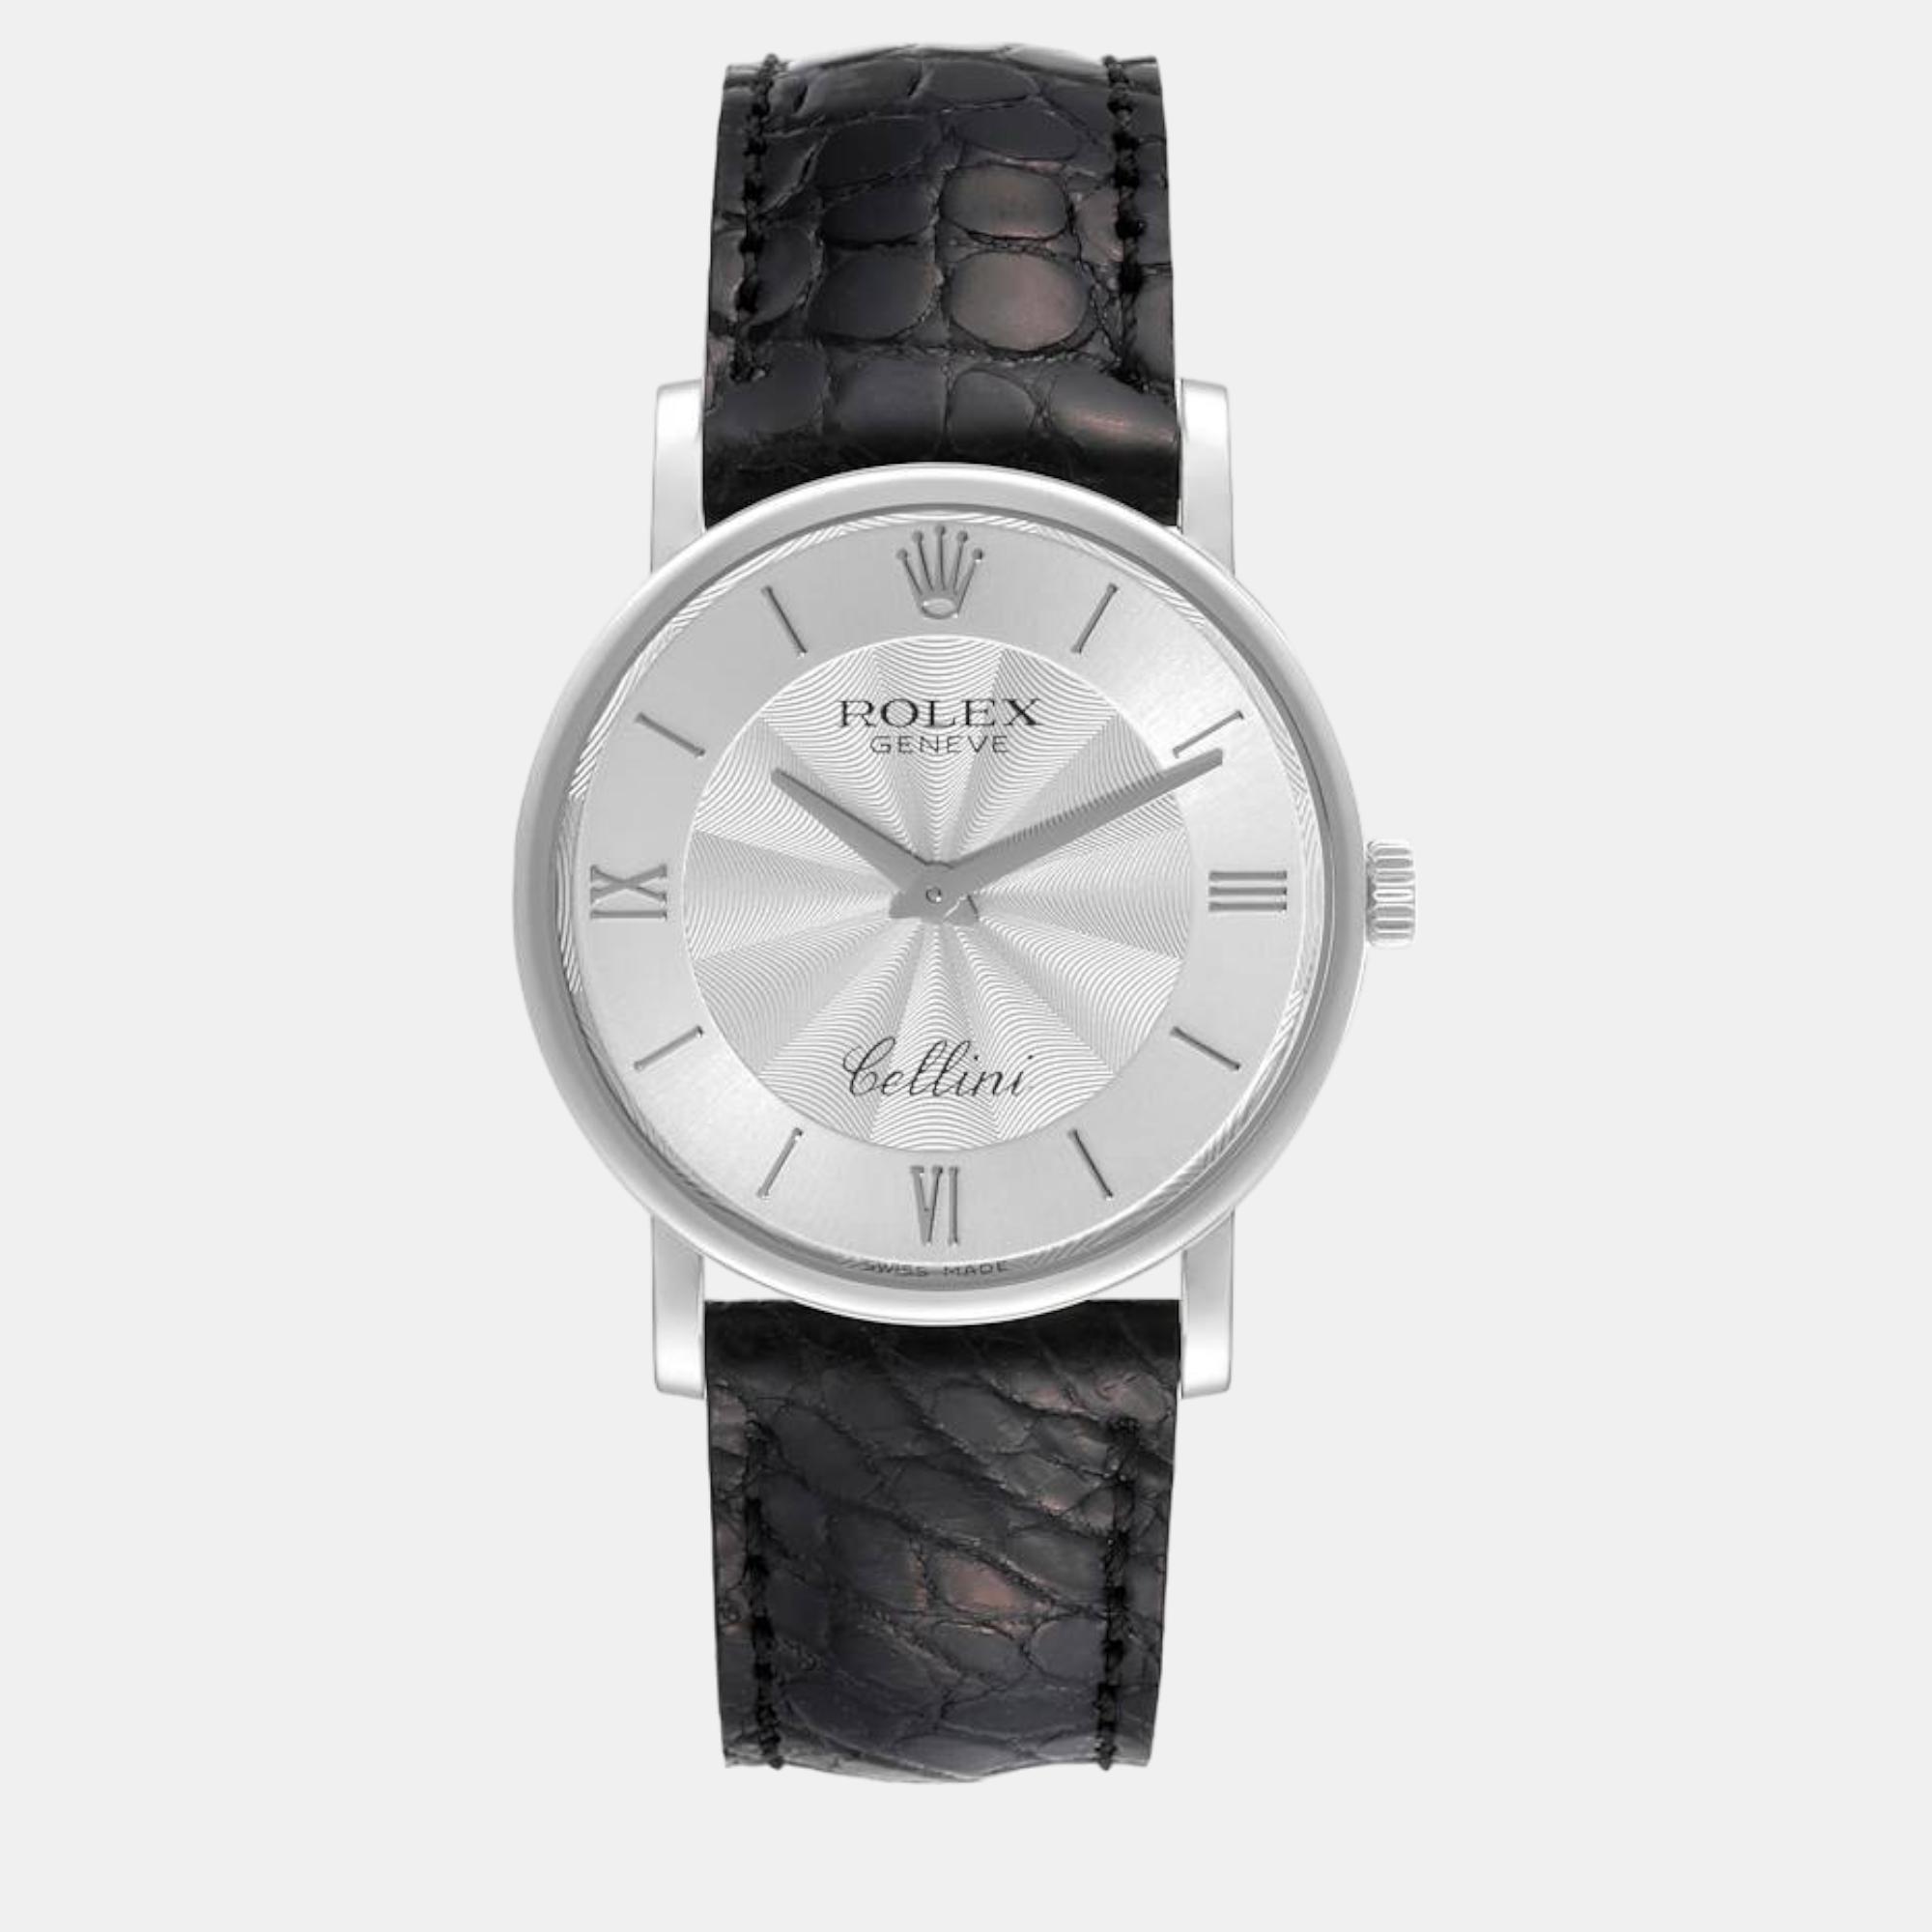 Rolex cellini classic white gold decorated silver dial mens watch 5115